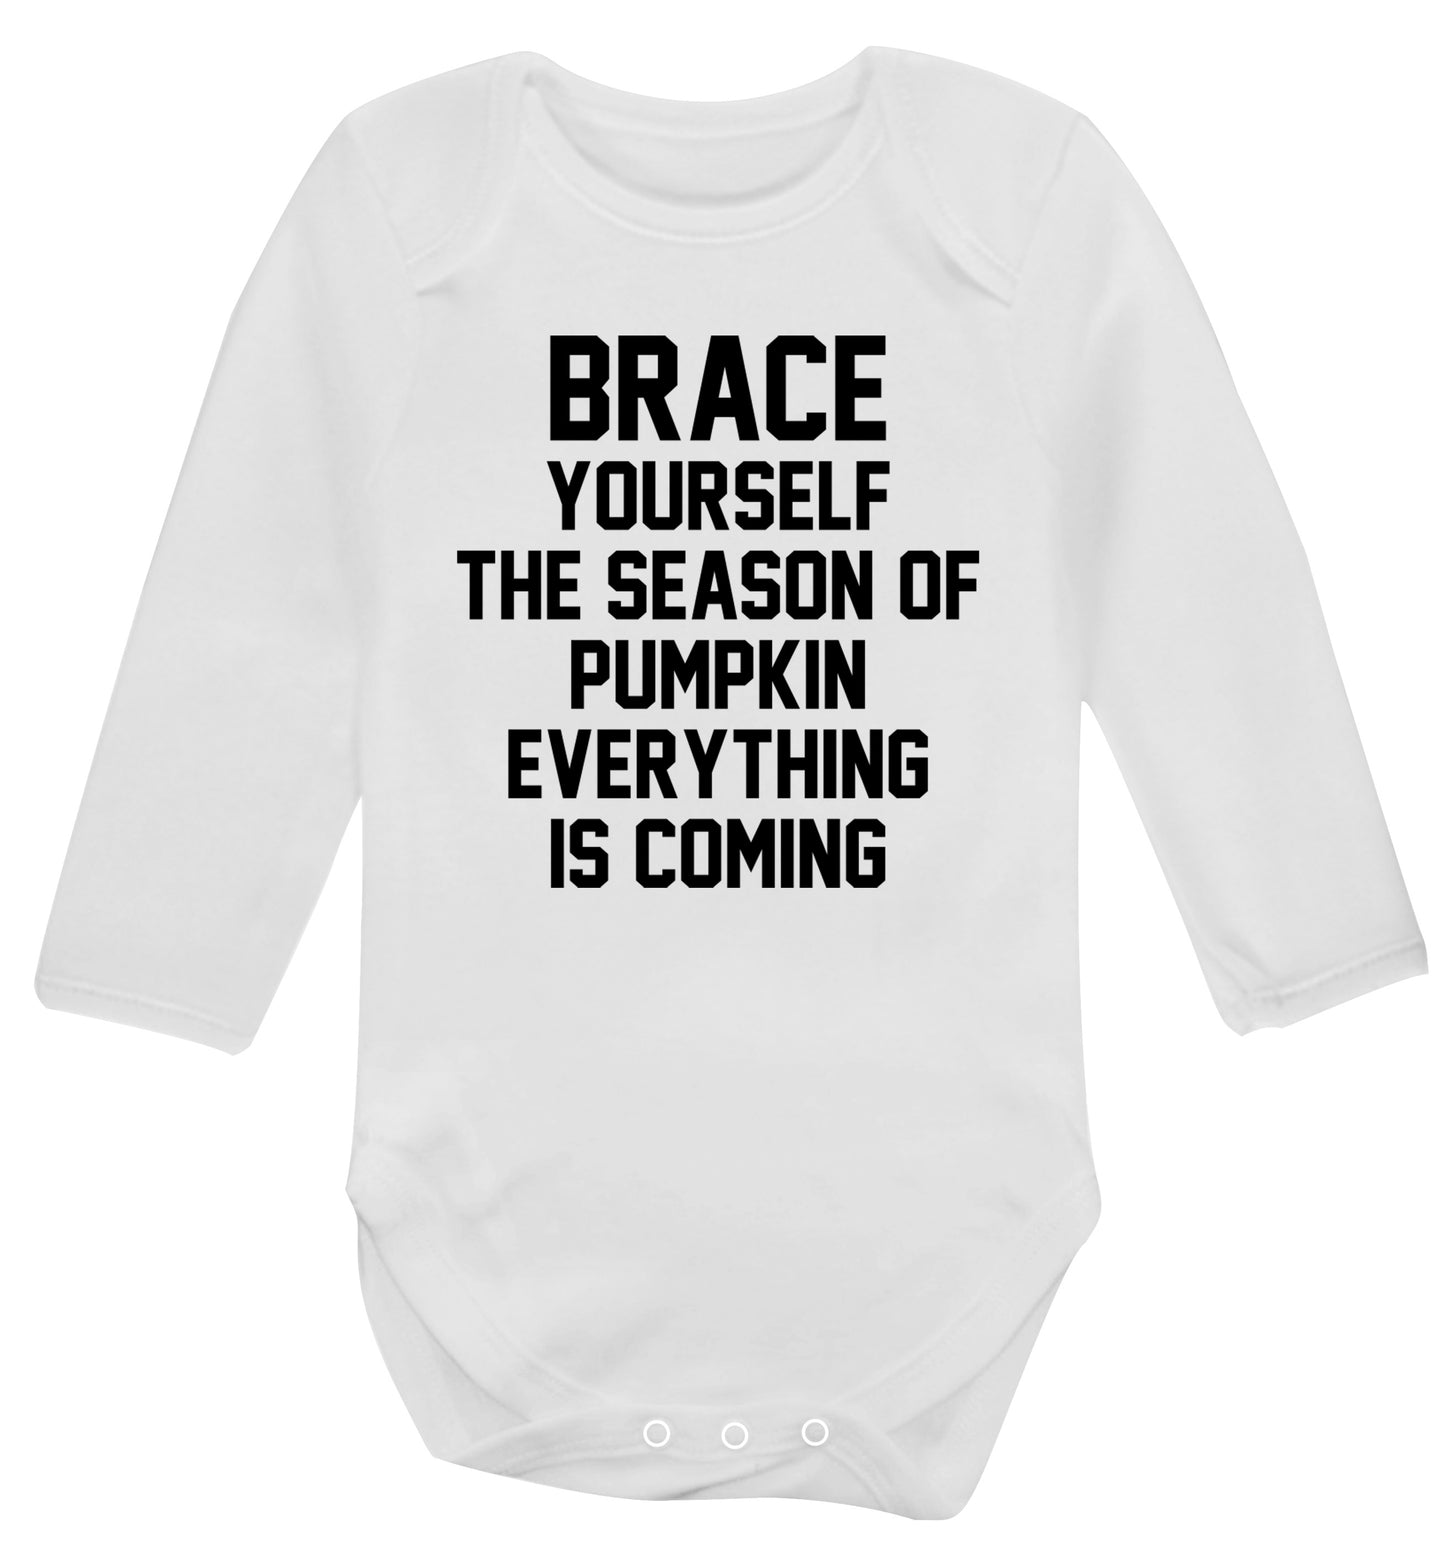 Brace yourself the season of pumpkin everything is coming Baby Vest long sleeved white 6-12 months